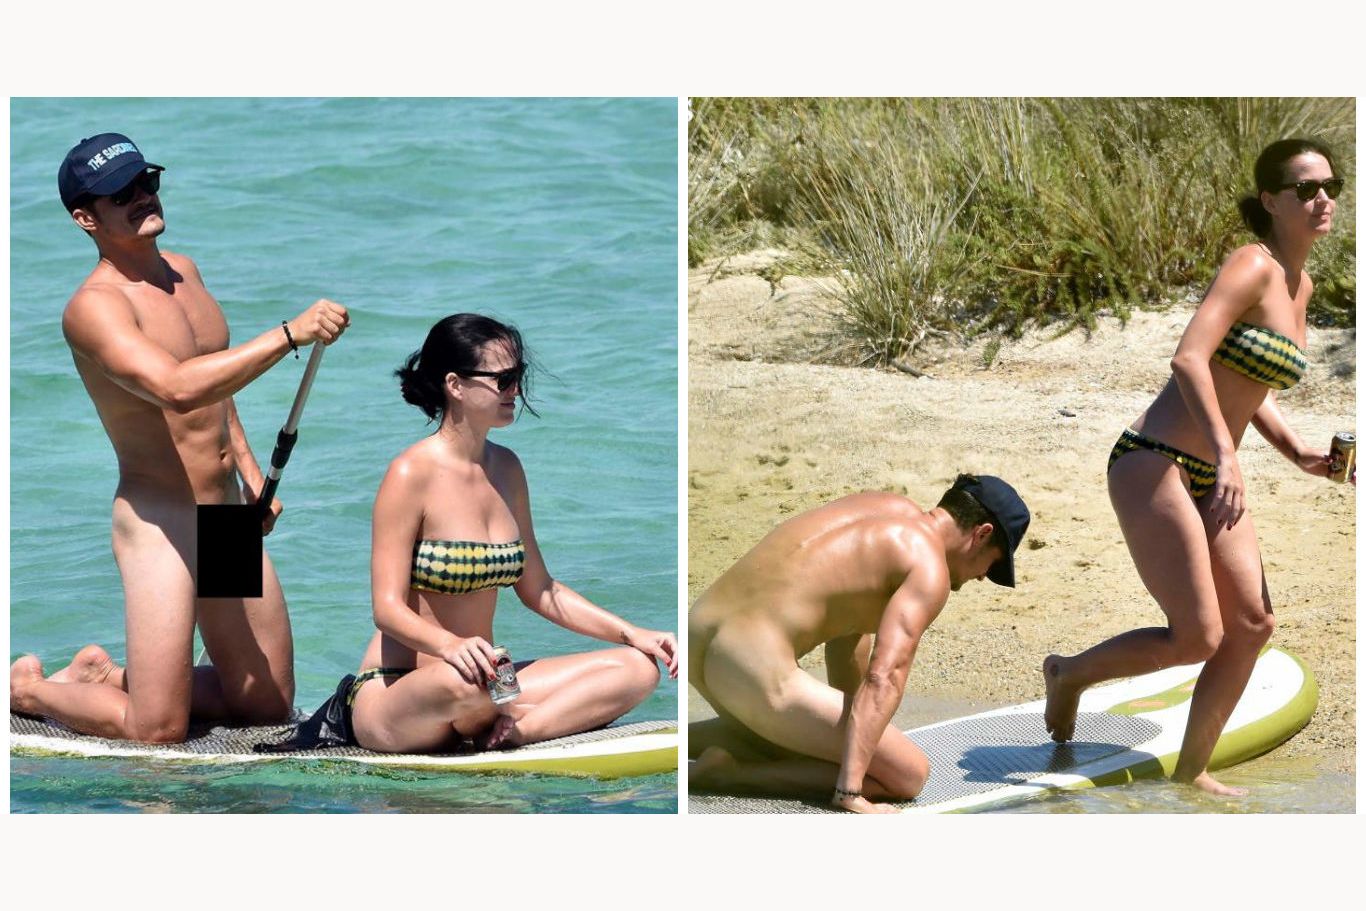 Uncensored Nude Pics Of Orlando On Paddle Board Are Here!